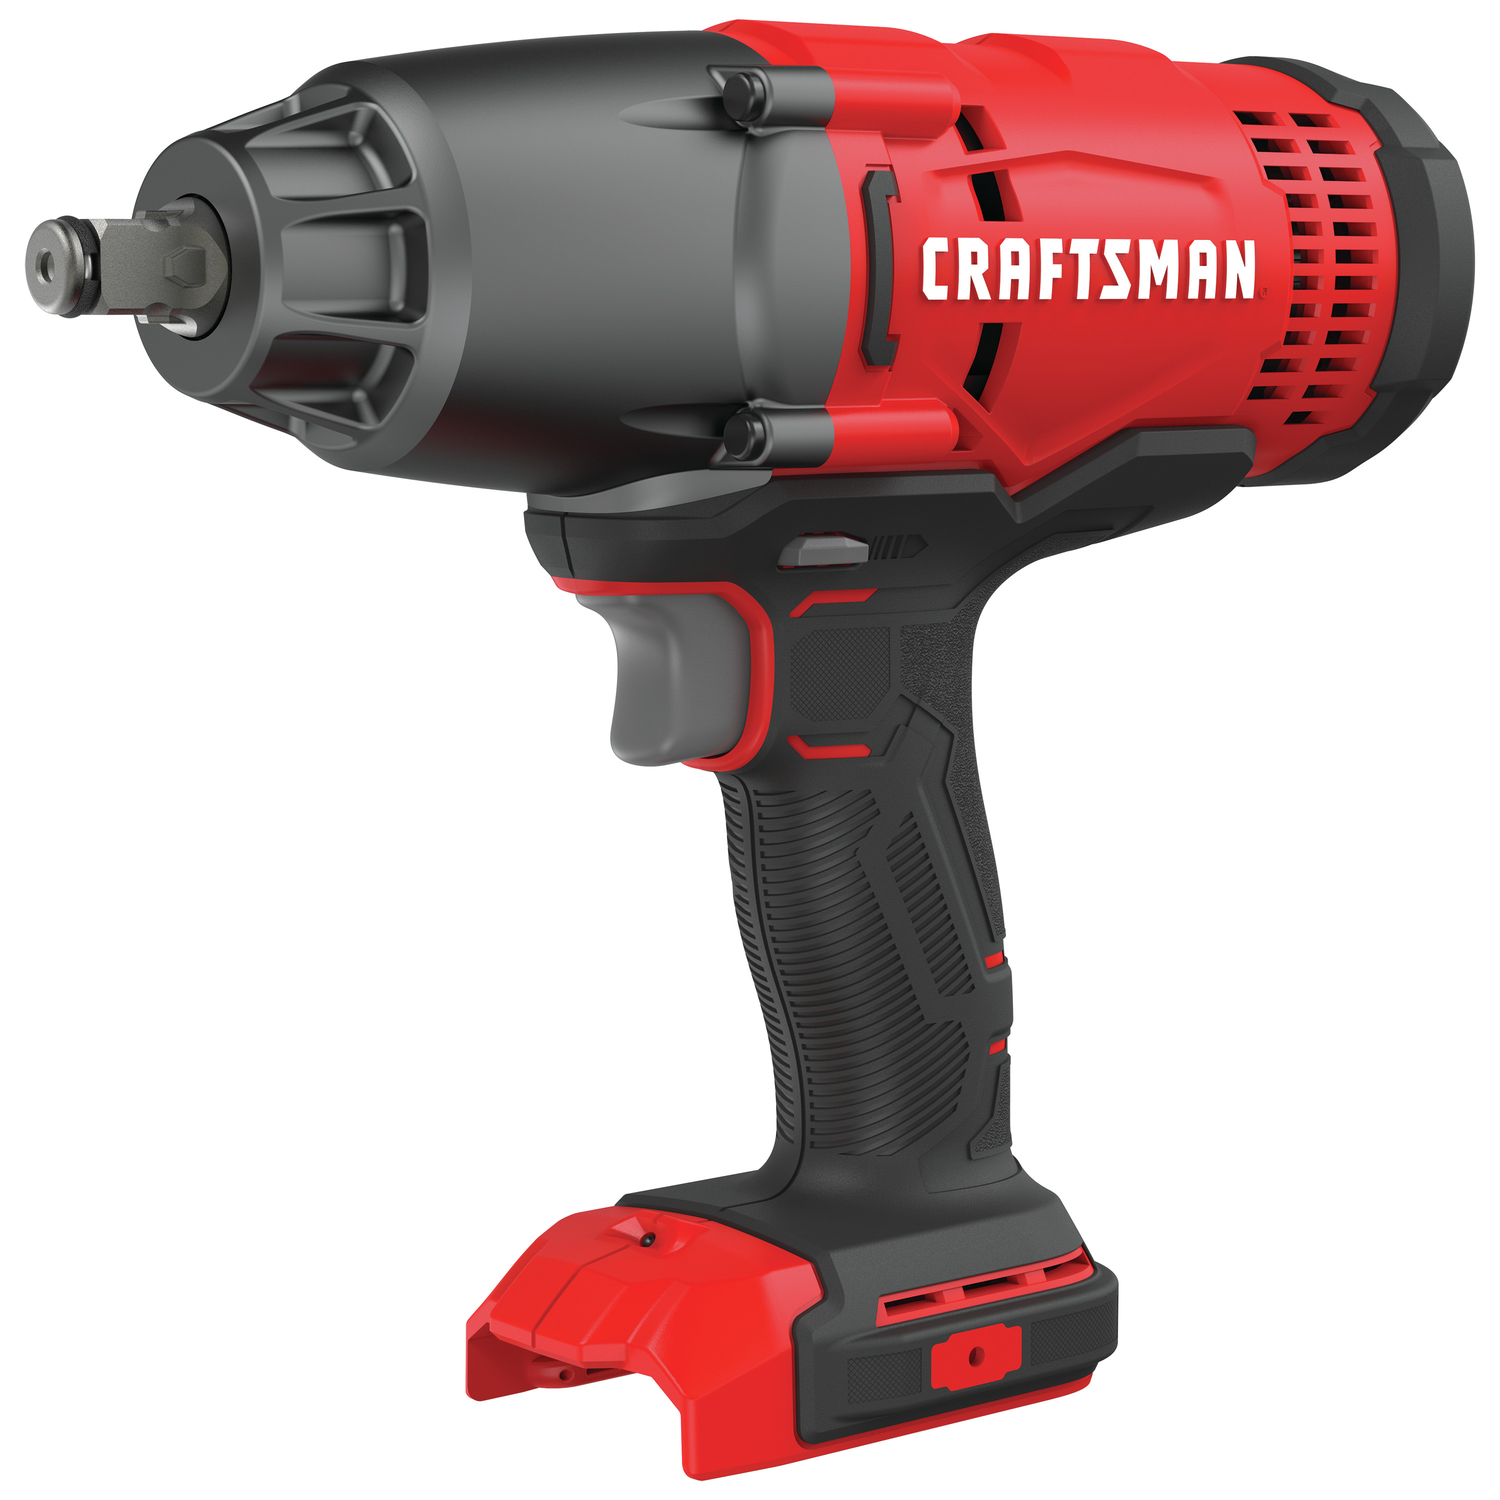 Craftsman V20 1/2 in. Cordless Brushed Impact Wrench Tool Only